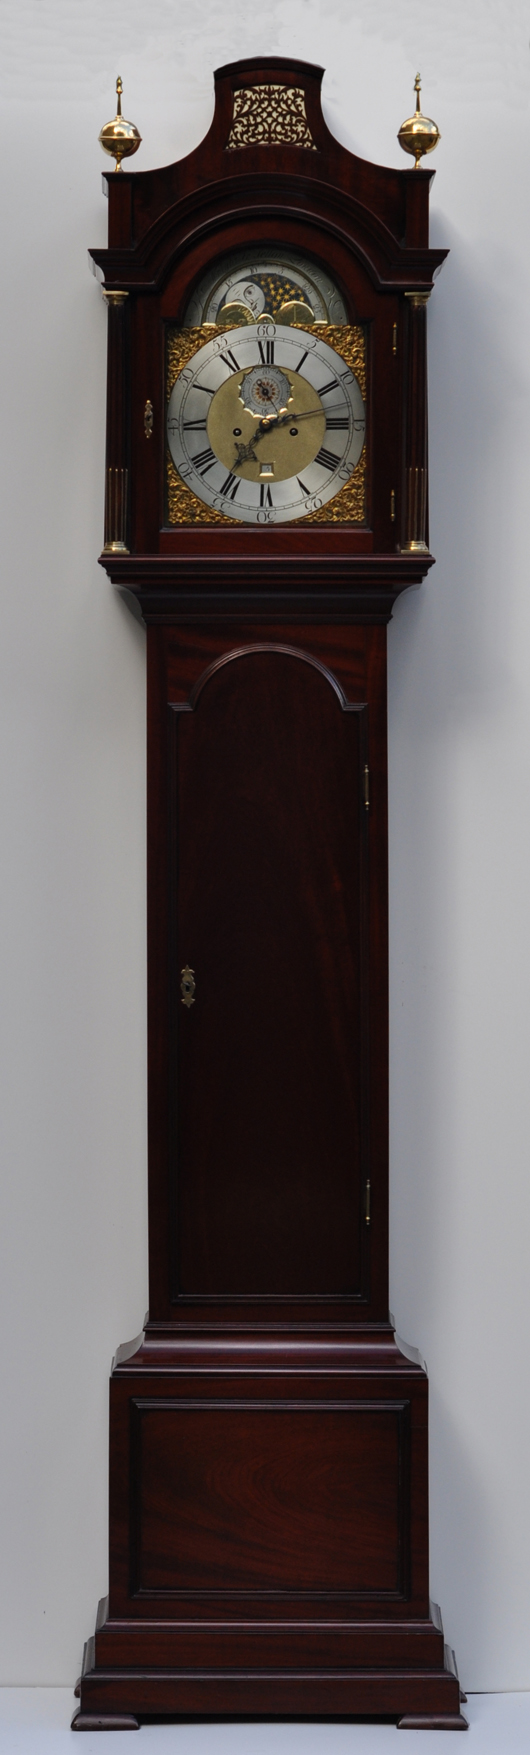 An 8 day longcase by Wright & Sellon of London, c 1760 from FJ and RD Story Antique Clocks